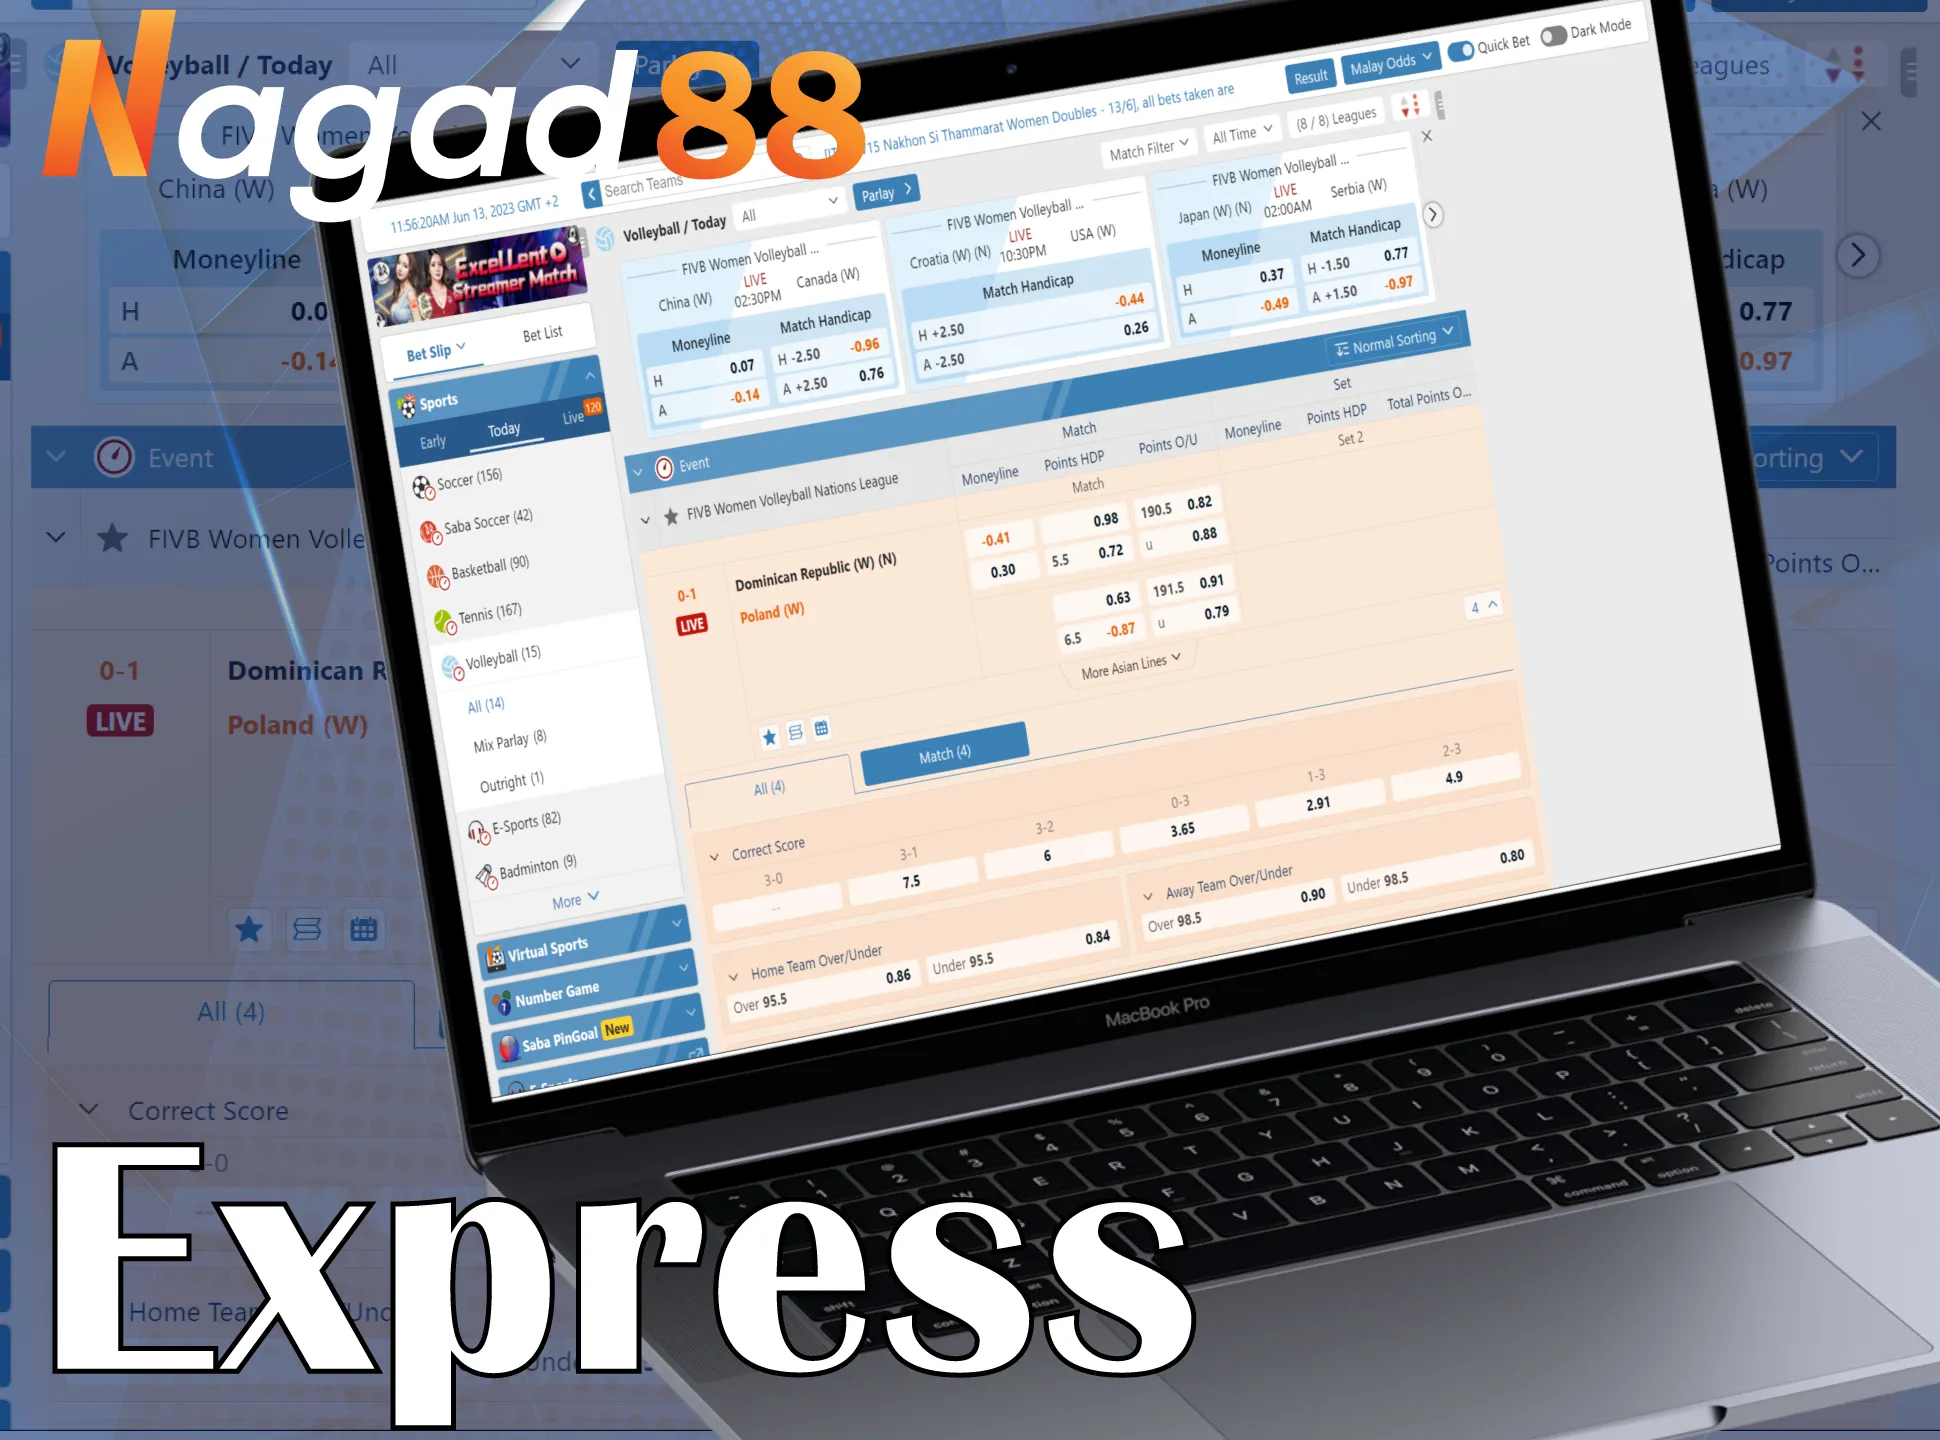 Make express bets on matches, multiply odds and winnings with Nagad88.